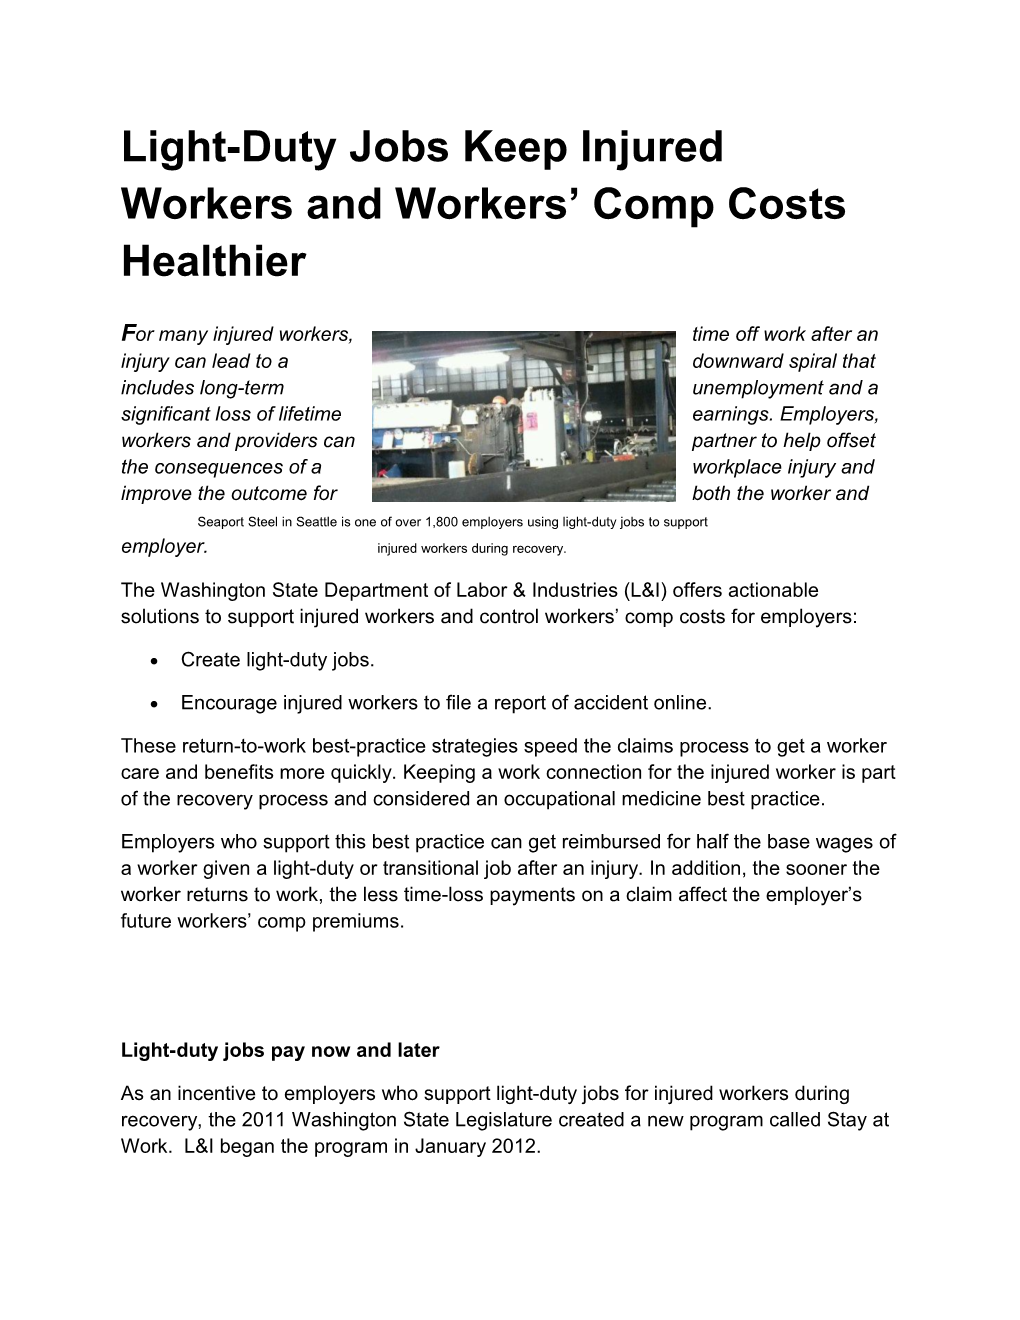 Light-Duty Jobs Keep Injured Workers and Workers Comp Costs Healthier